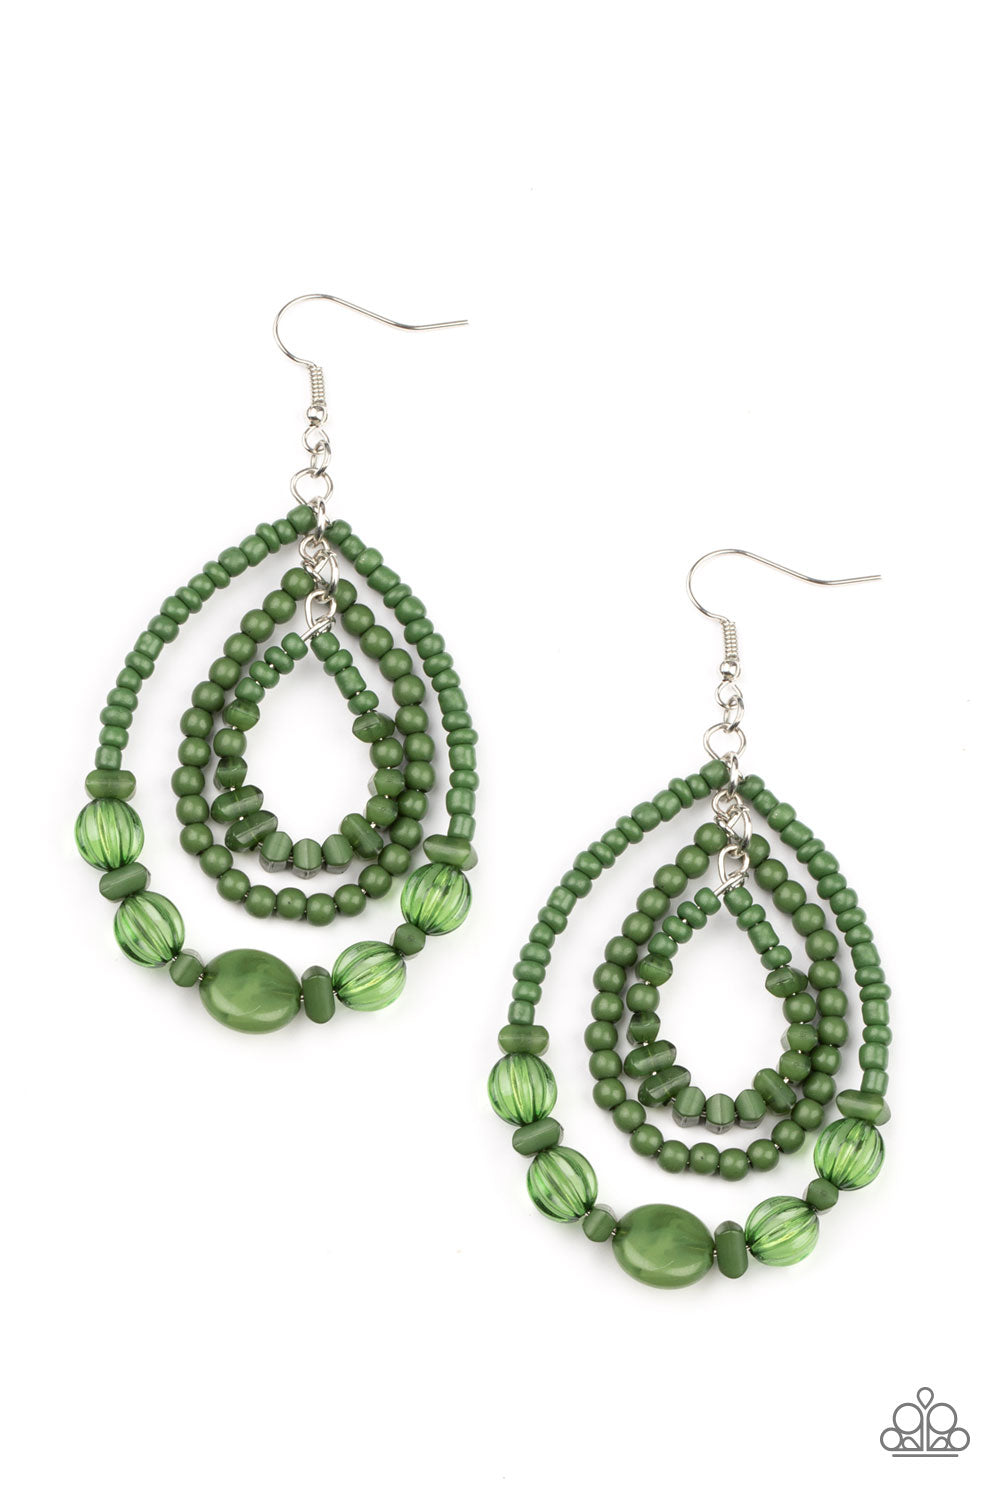 Prana Party - Green Seed Bead Earrings - Paparazzi Accessories